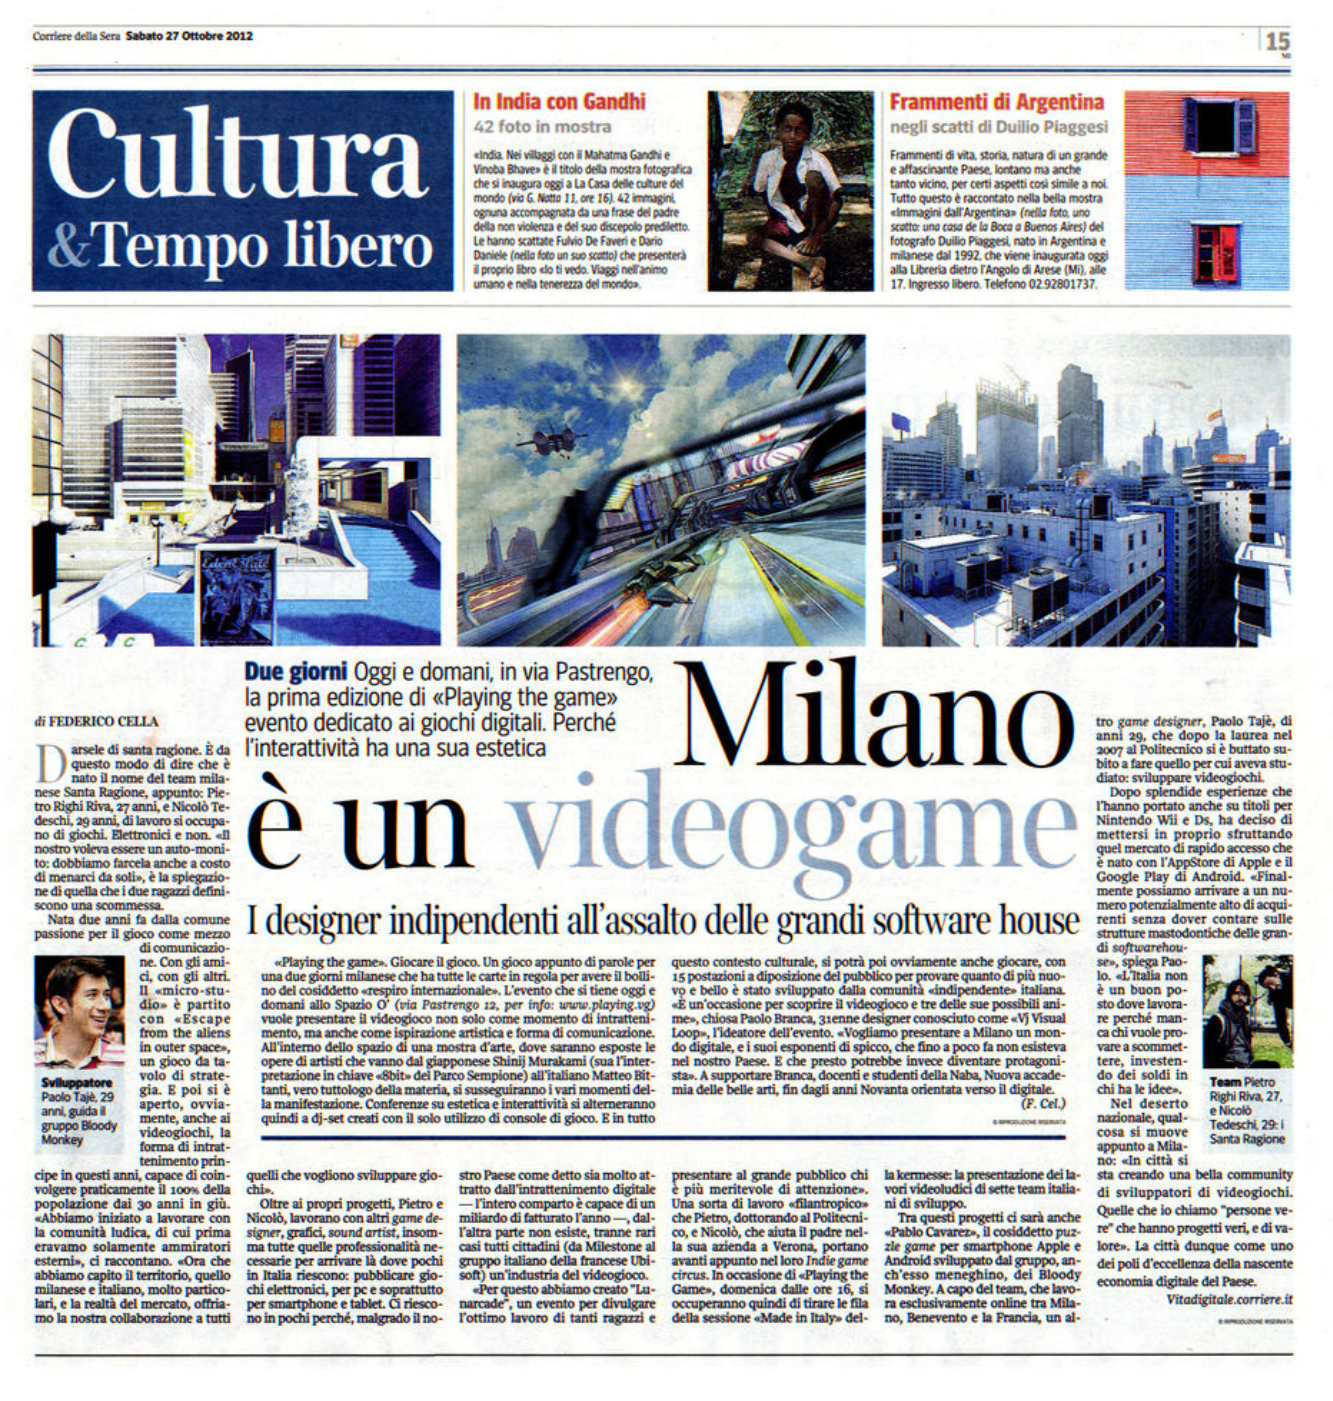  PLAYING THE GAME, Milan, Italy Media Coverage:  Corriere della Sera   2012 